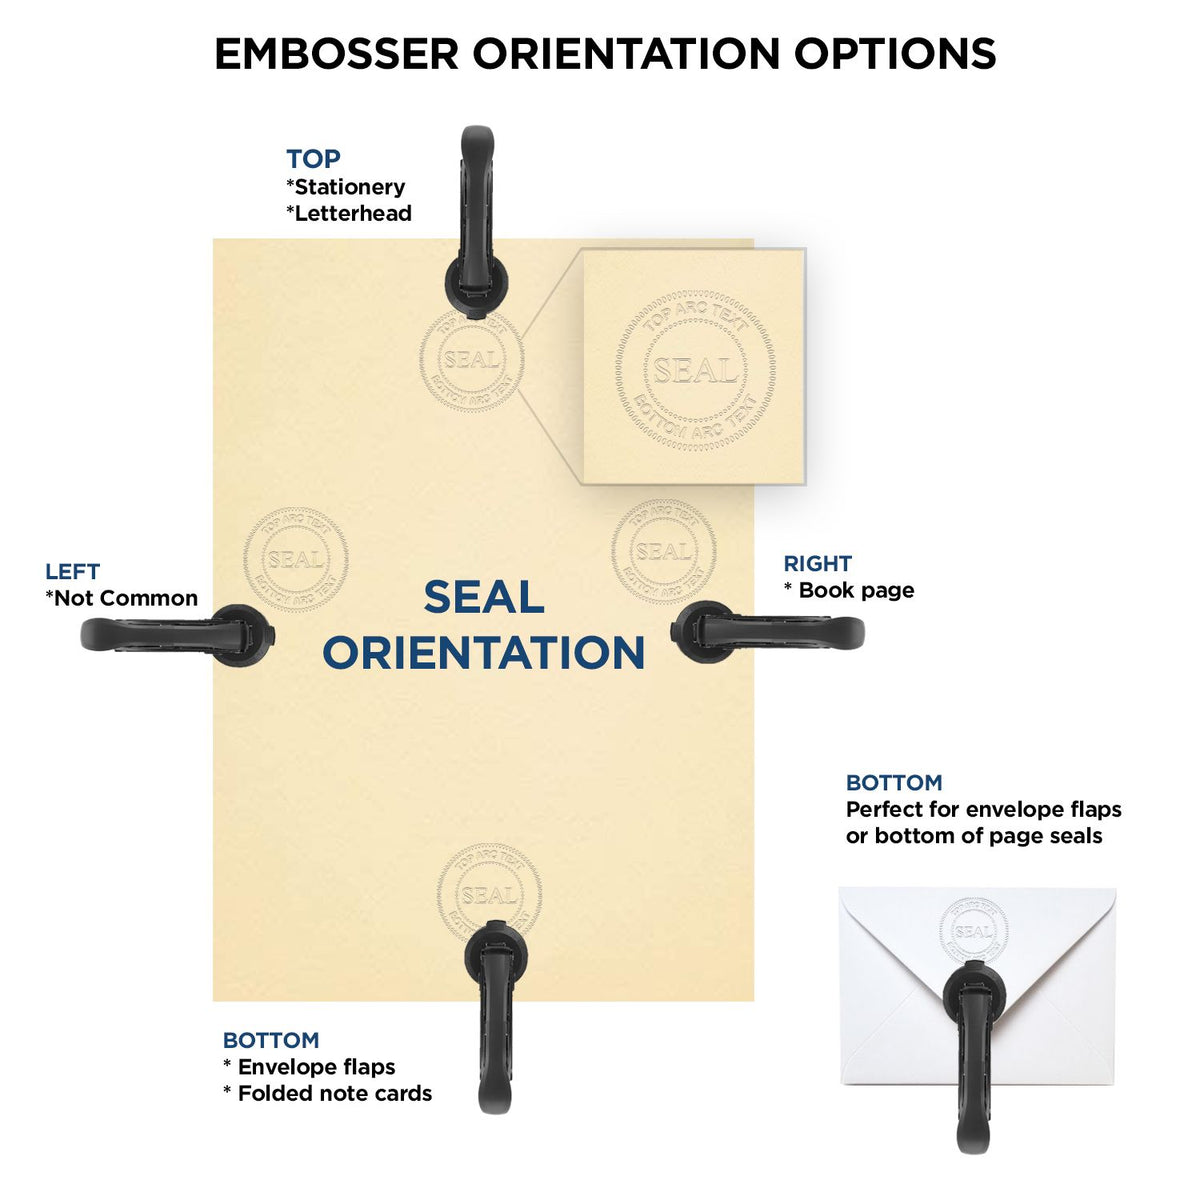 An infographic for the Heavy Duty Cast Iron Arizona Land Surveyor Seal Embosser showing embosser orientation, this is showing examples of a top, bottom, right and left insert.